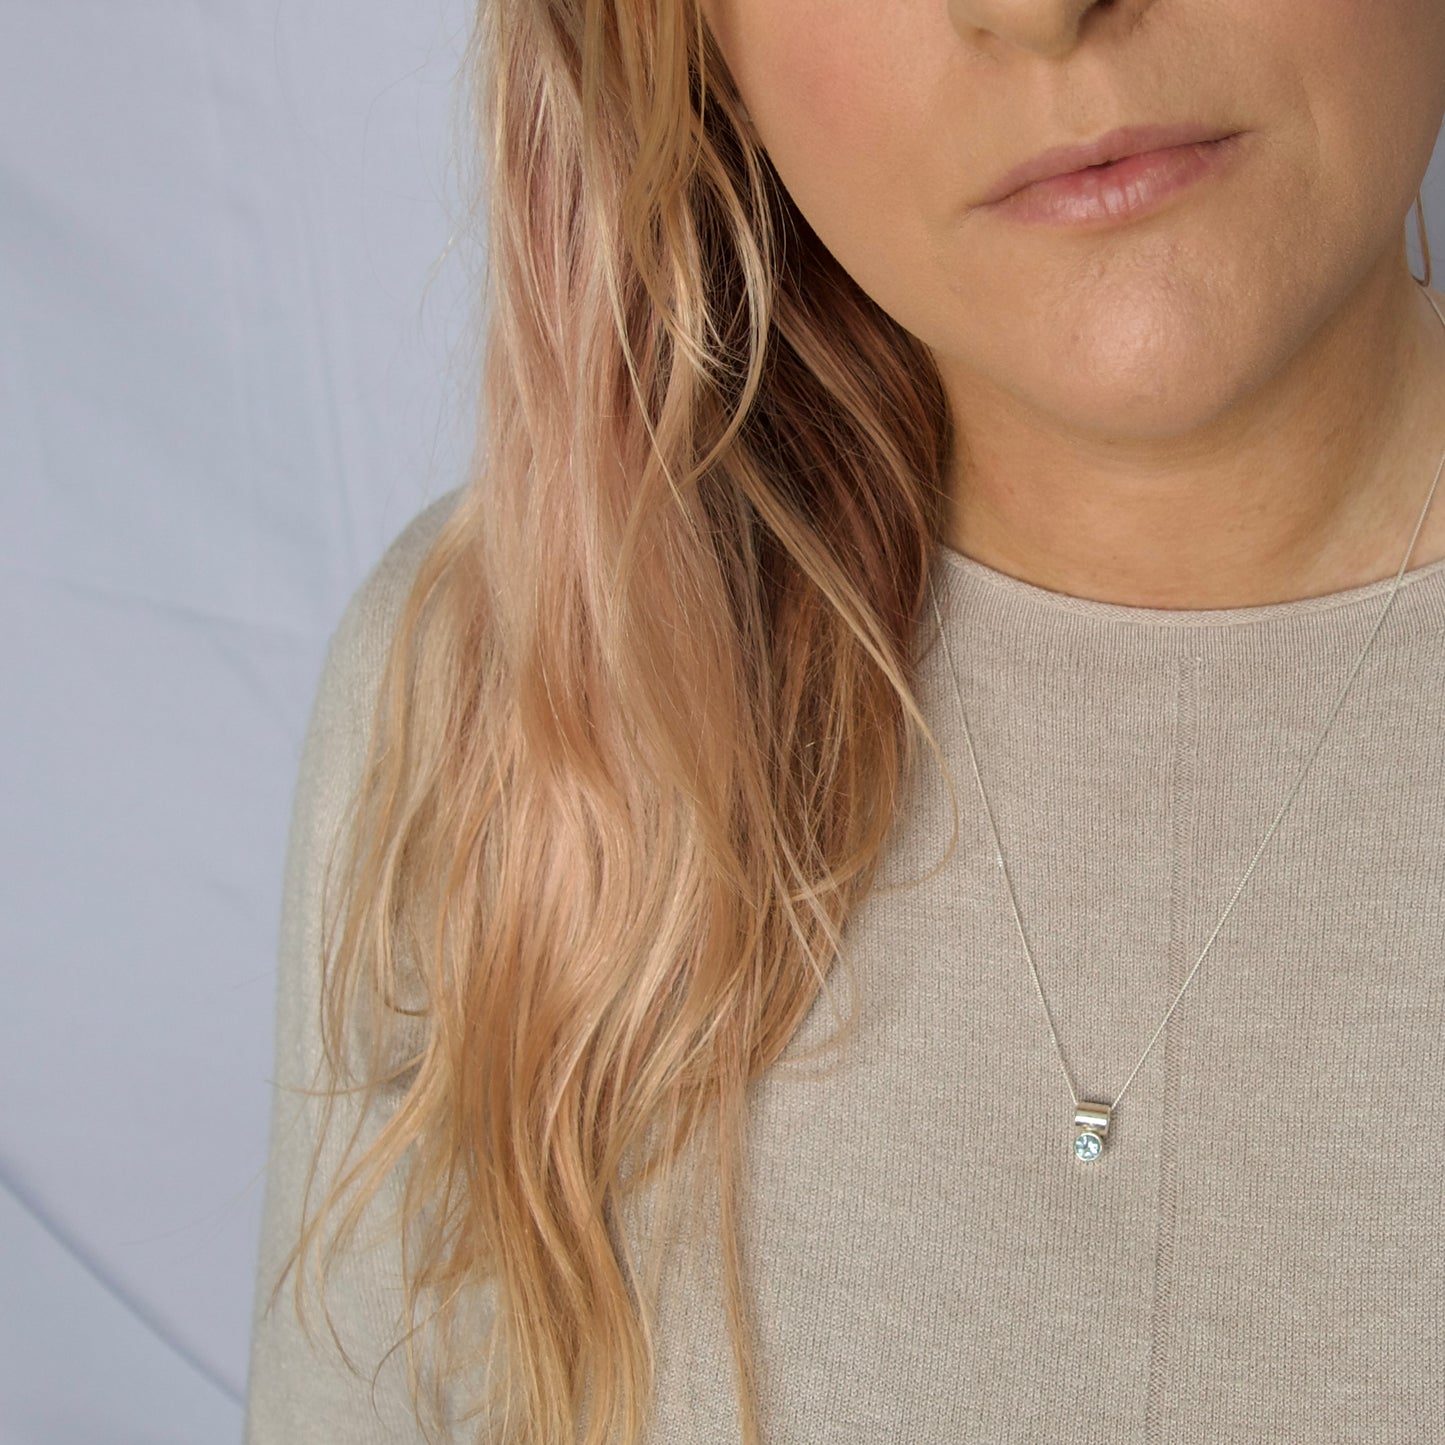 'Happiness' Topaz Necklace